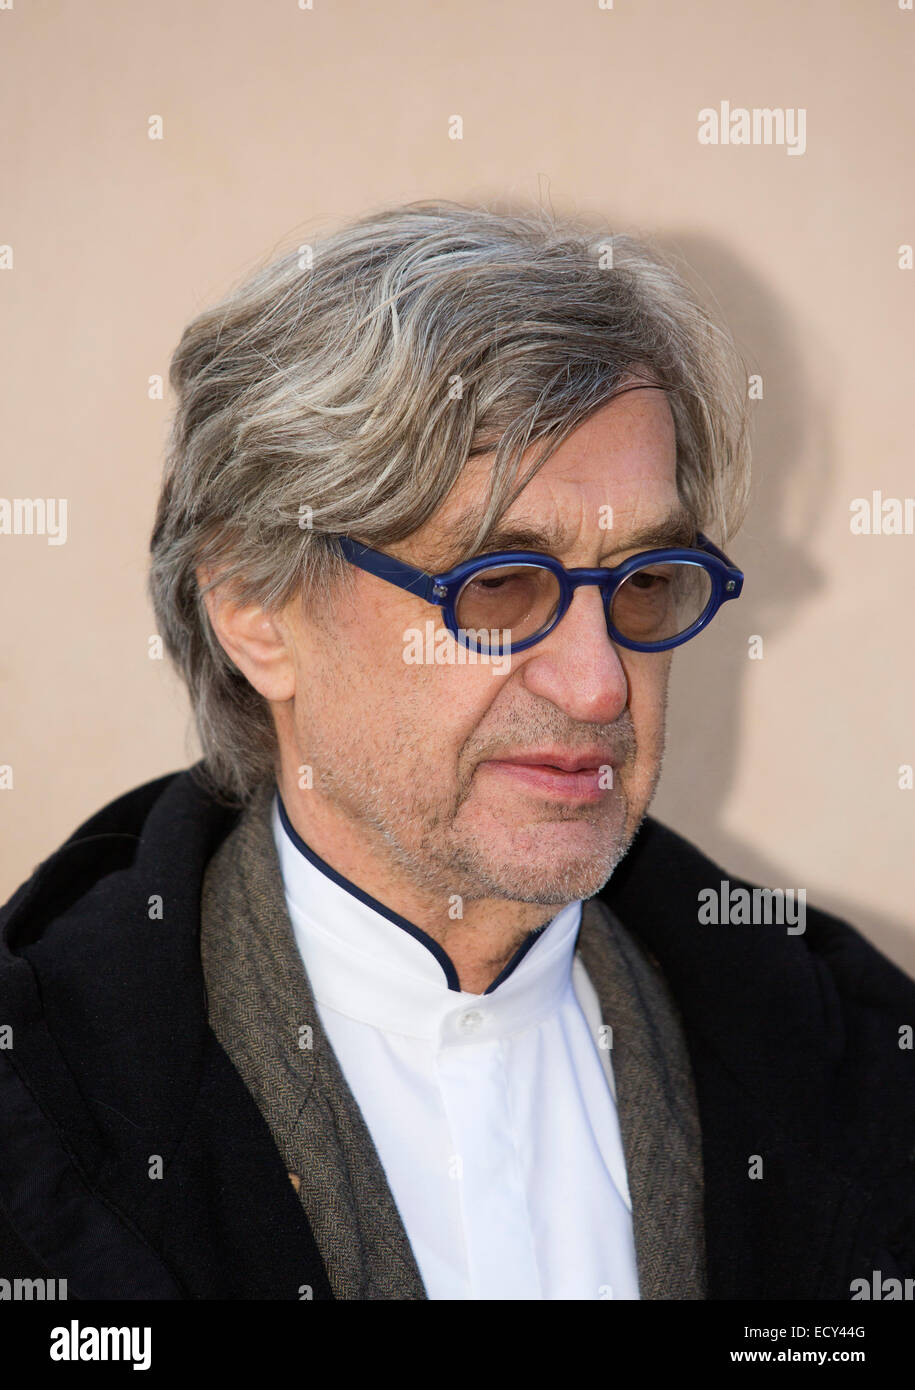 Wim Wenders, German film director, photographer and professor of film at the Academy of Fine Arts in Hamburg, unveiling of the Stock Photo